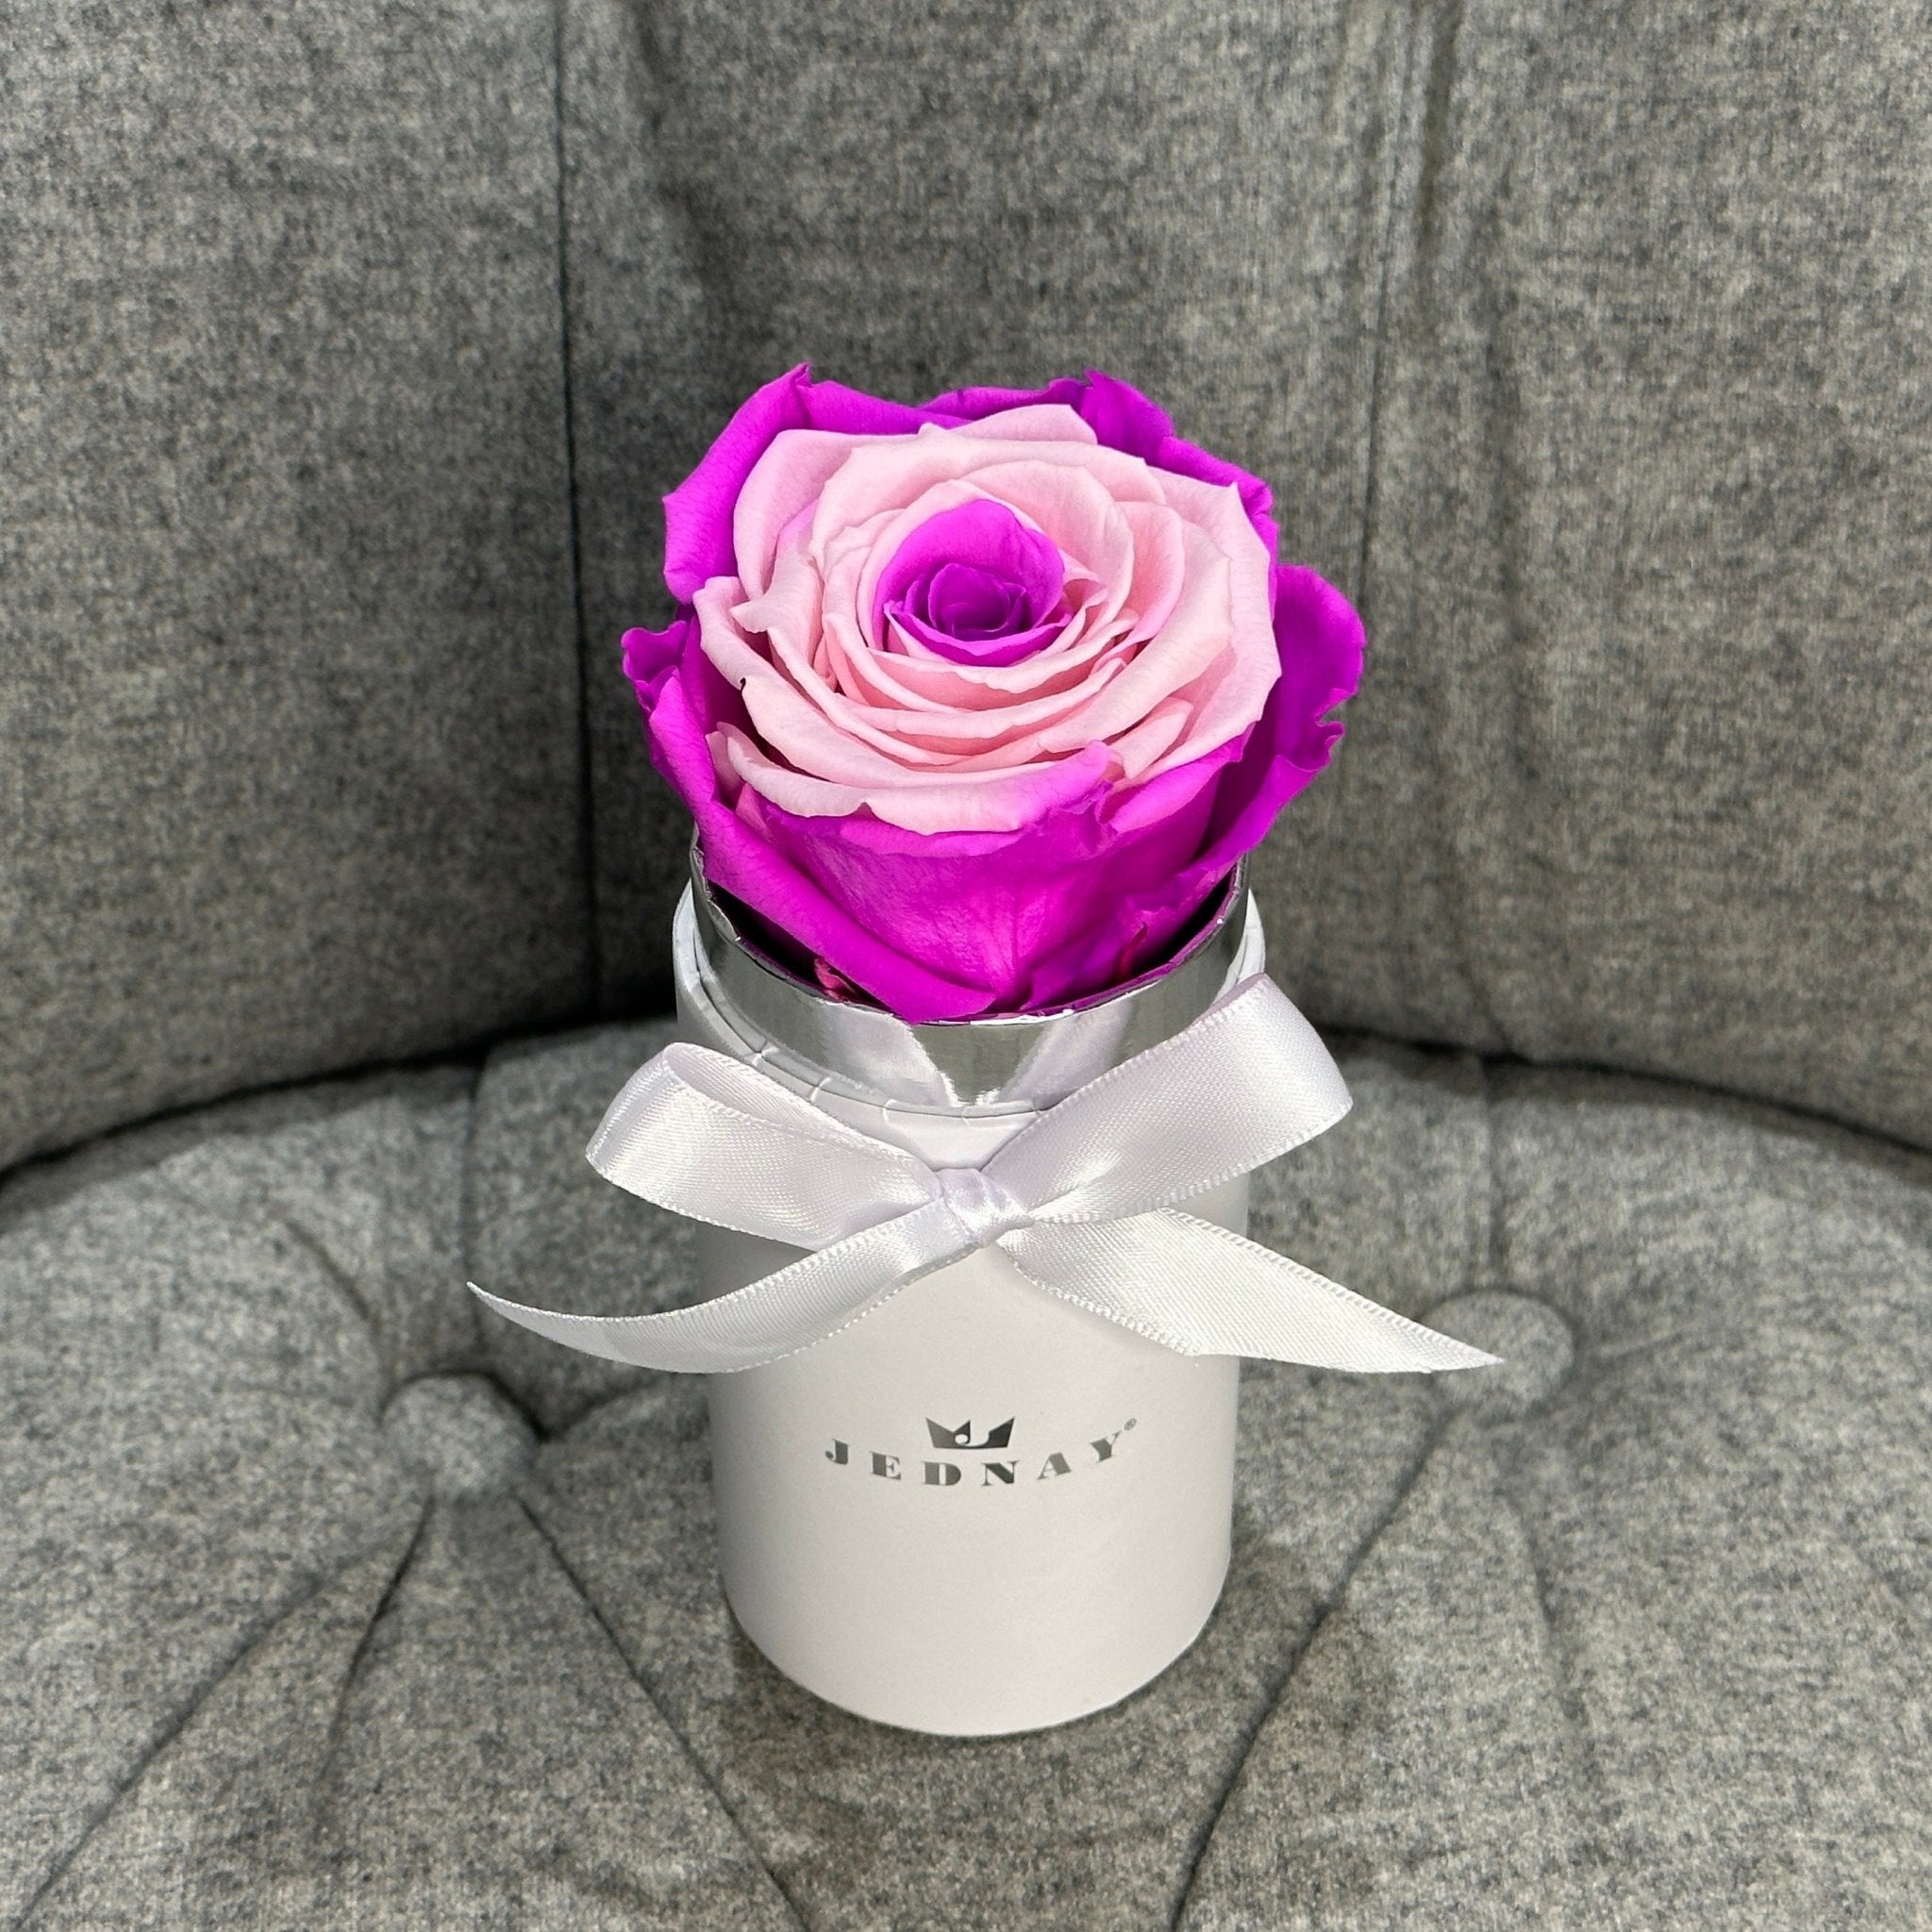 The Uno - Candy Floss Eternal Rose - Classic White Box - Jednay Roses